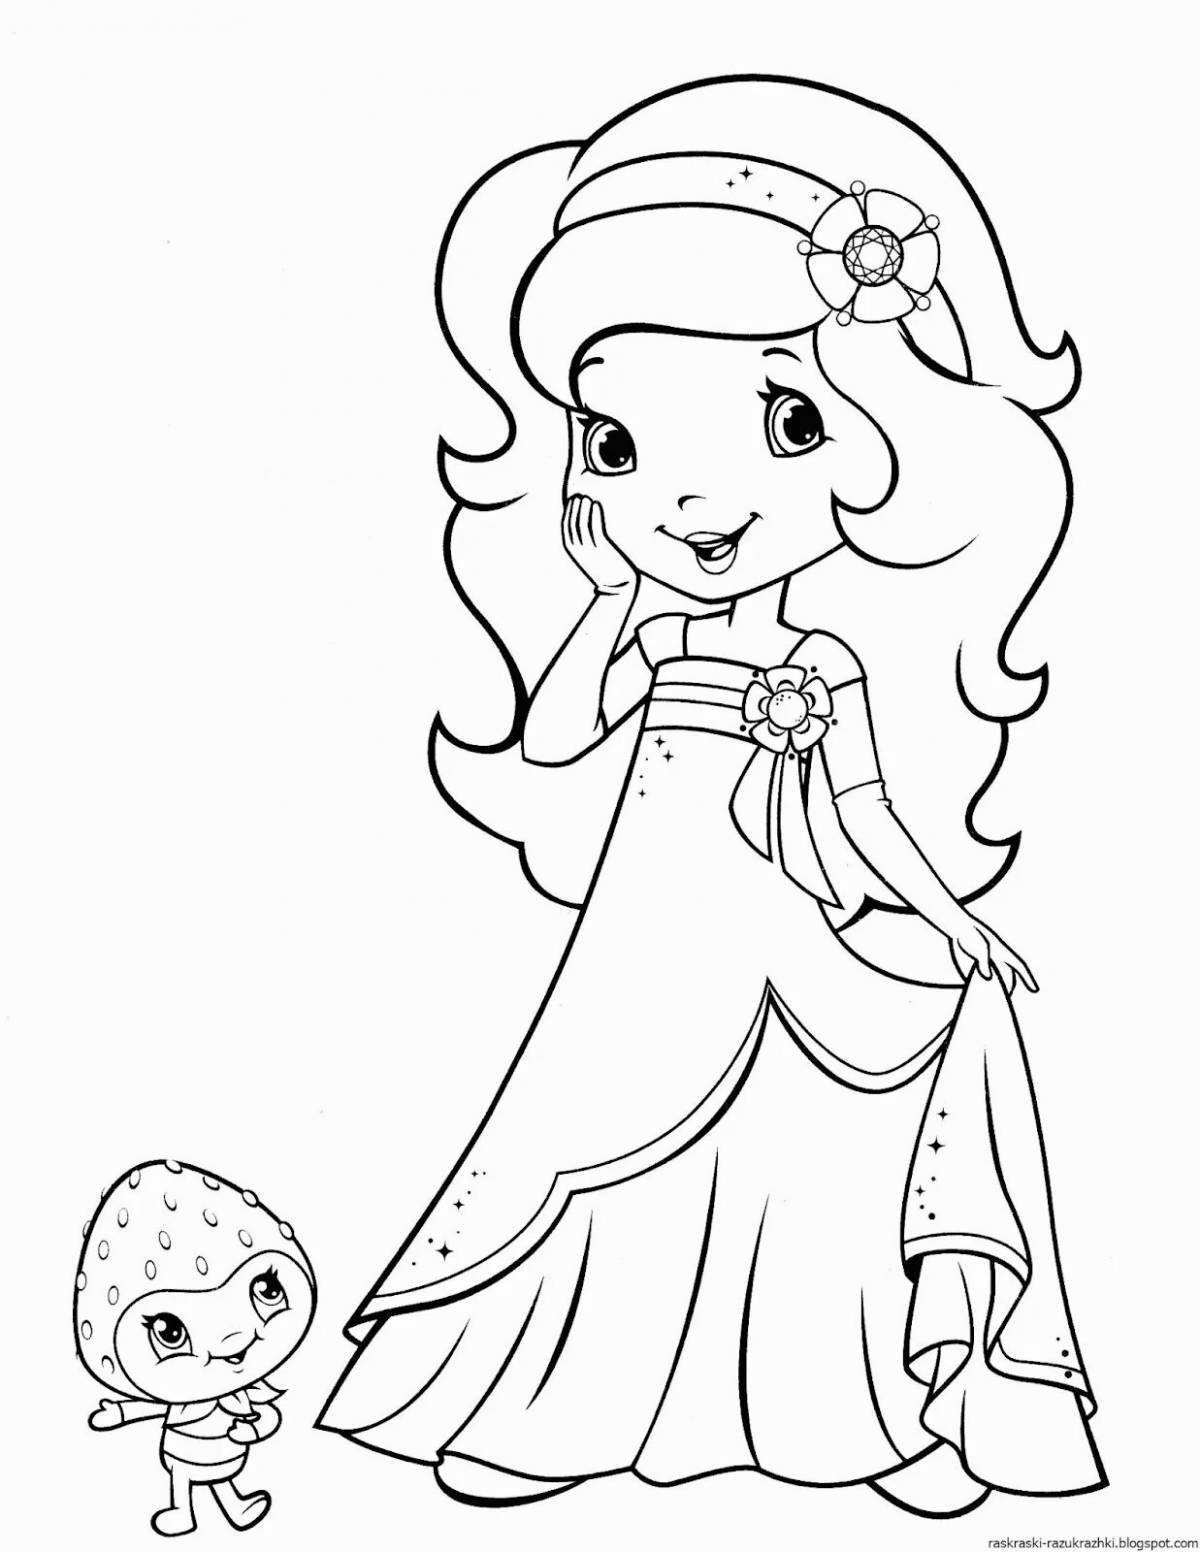 Glamorous coloring book for children 3-4 years old for girls princess